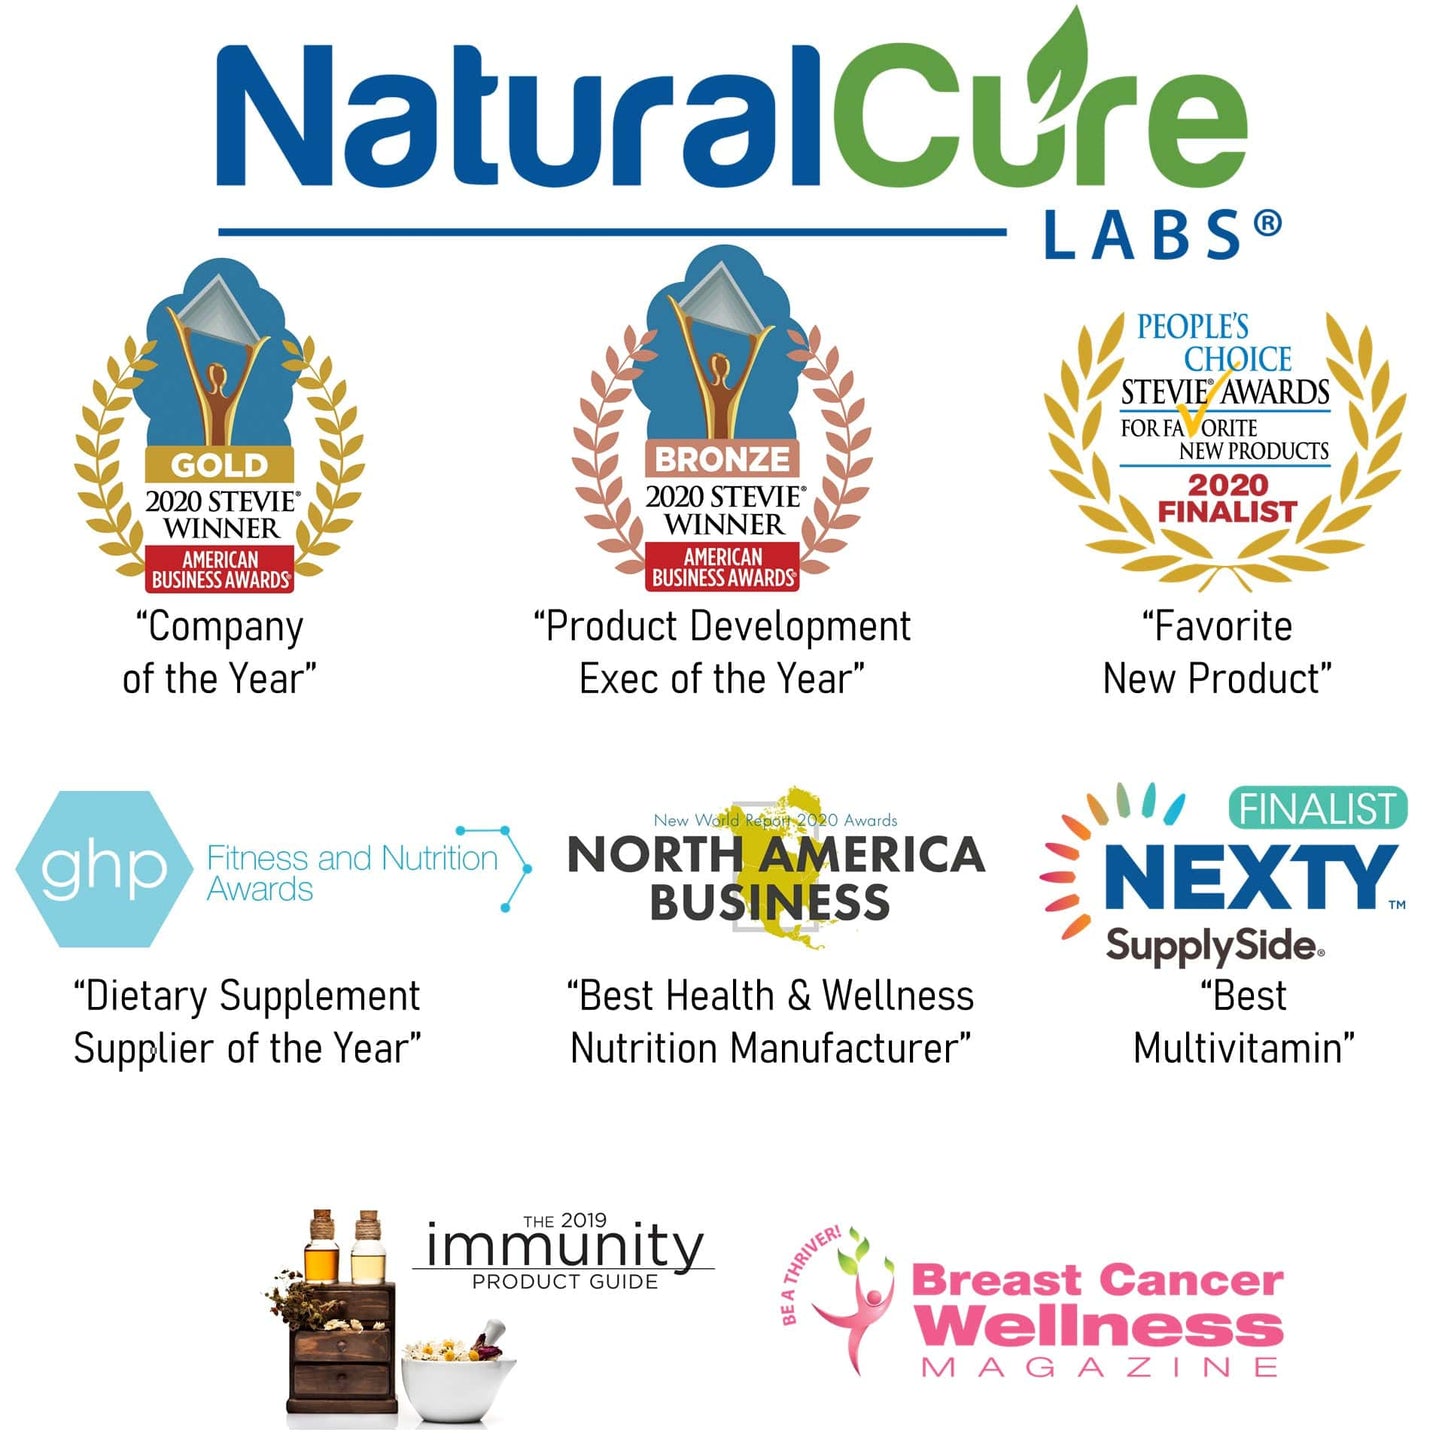 Another Award-Winning Year for Natural Cure Labs